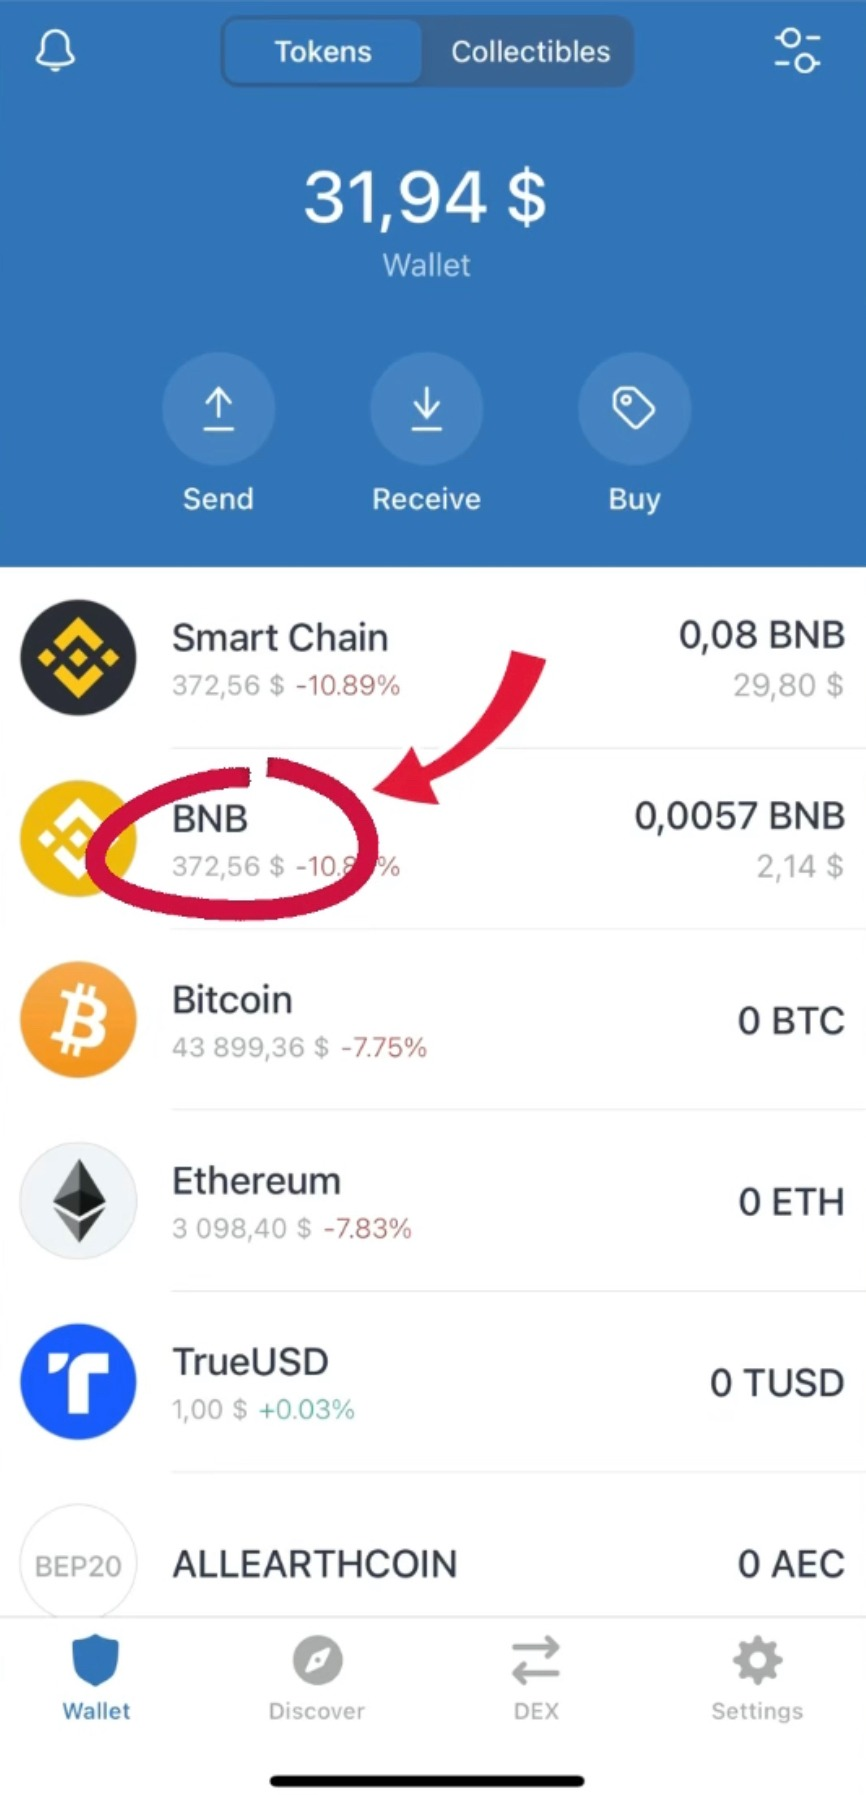 Select and click 'BNB' coin